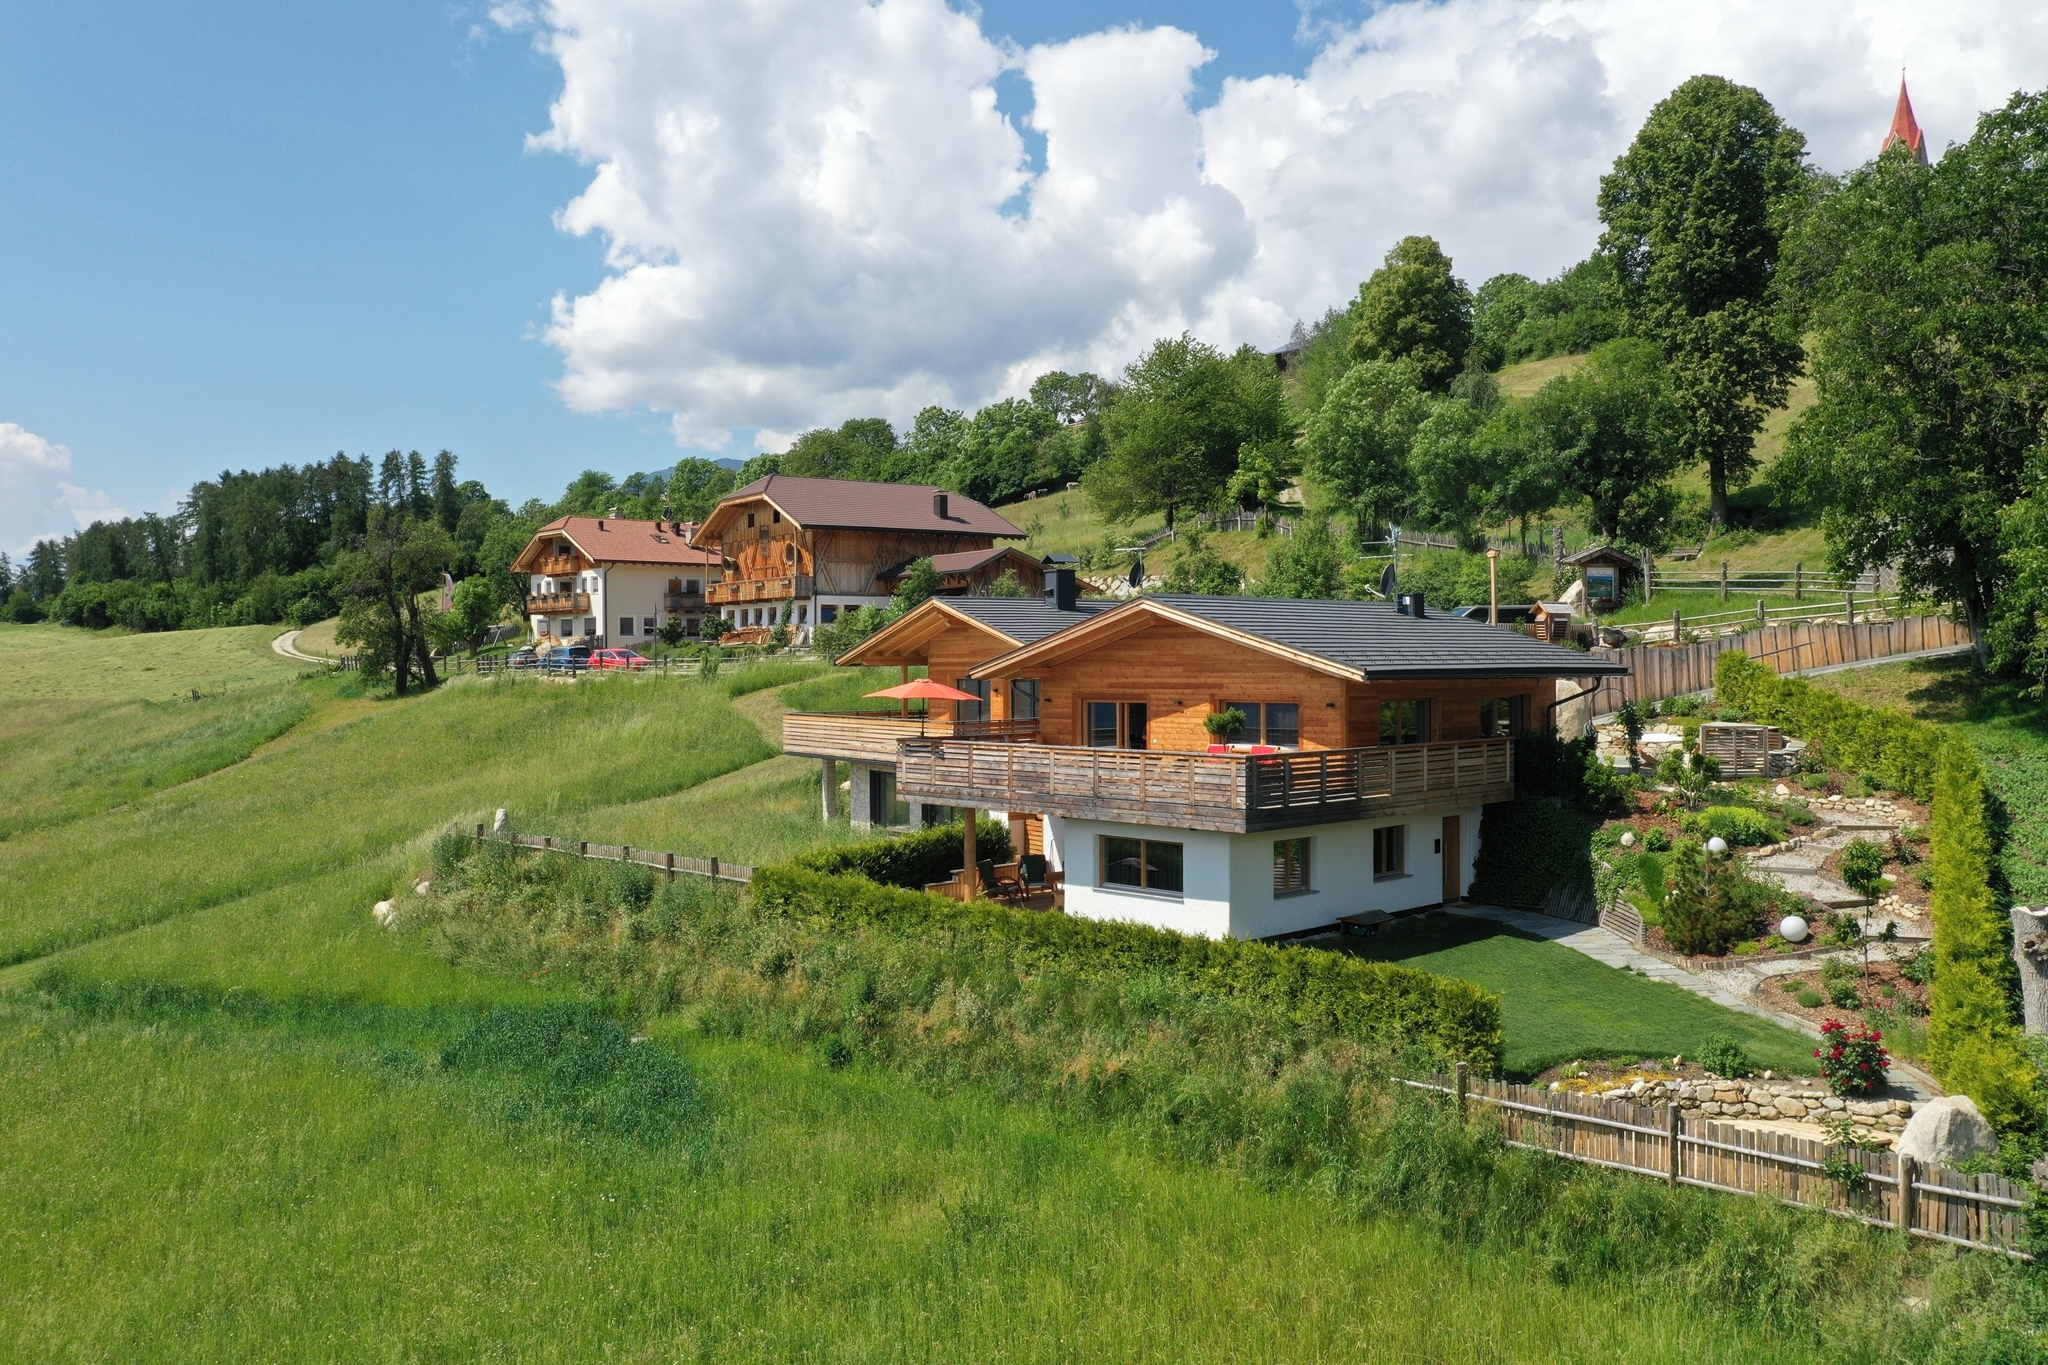 Panorama Chalet Frieda - Spinga in Valle Isarco